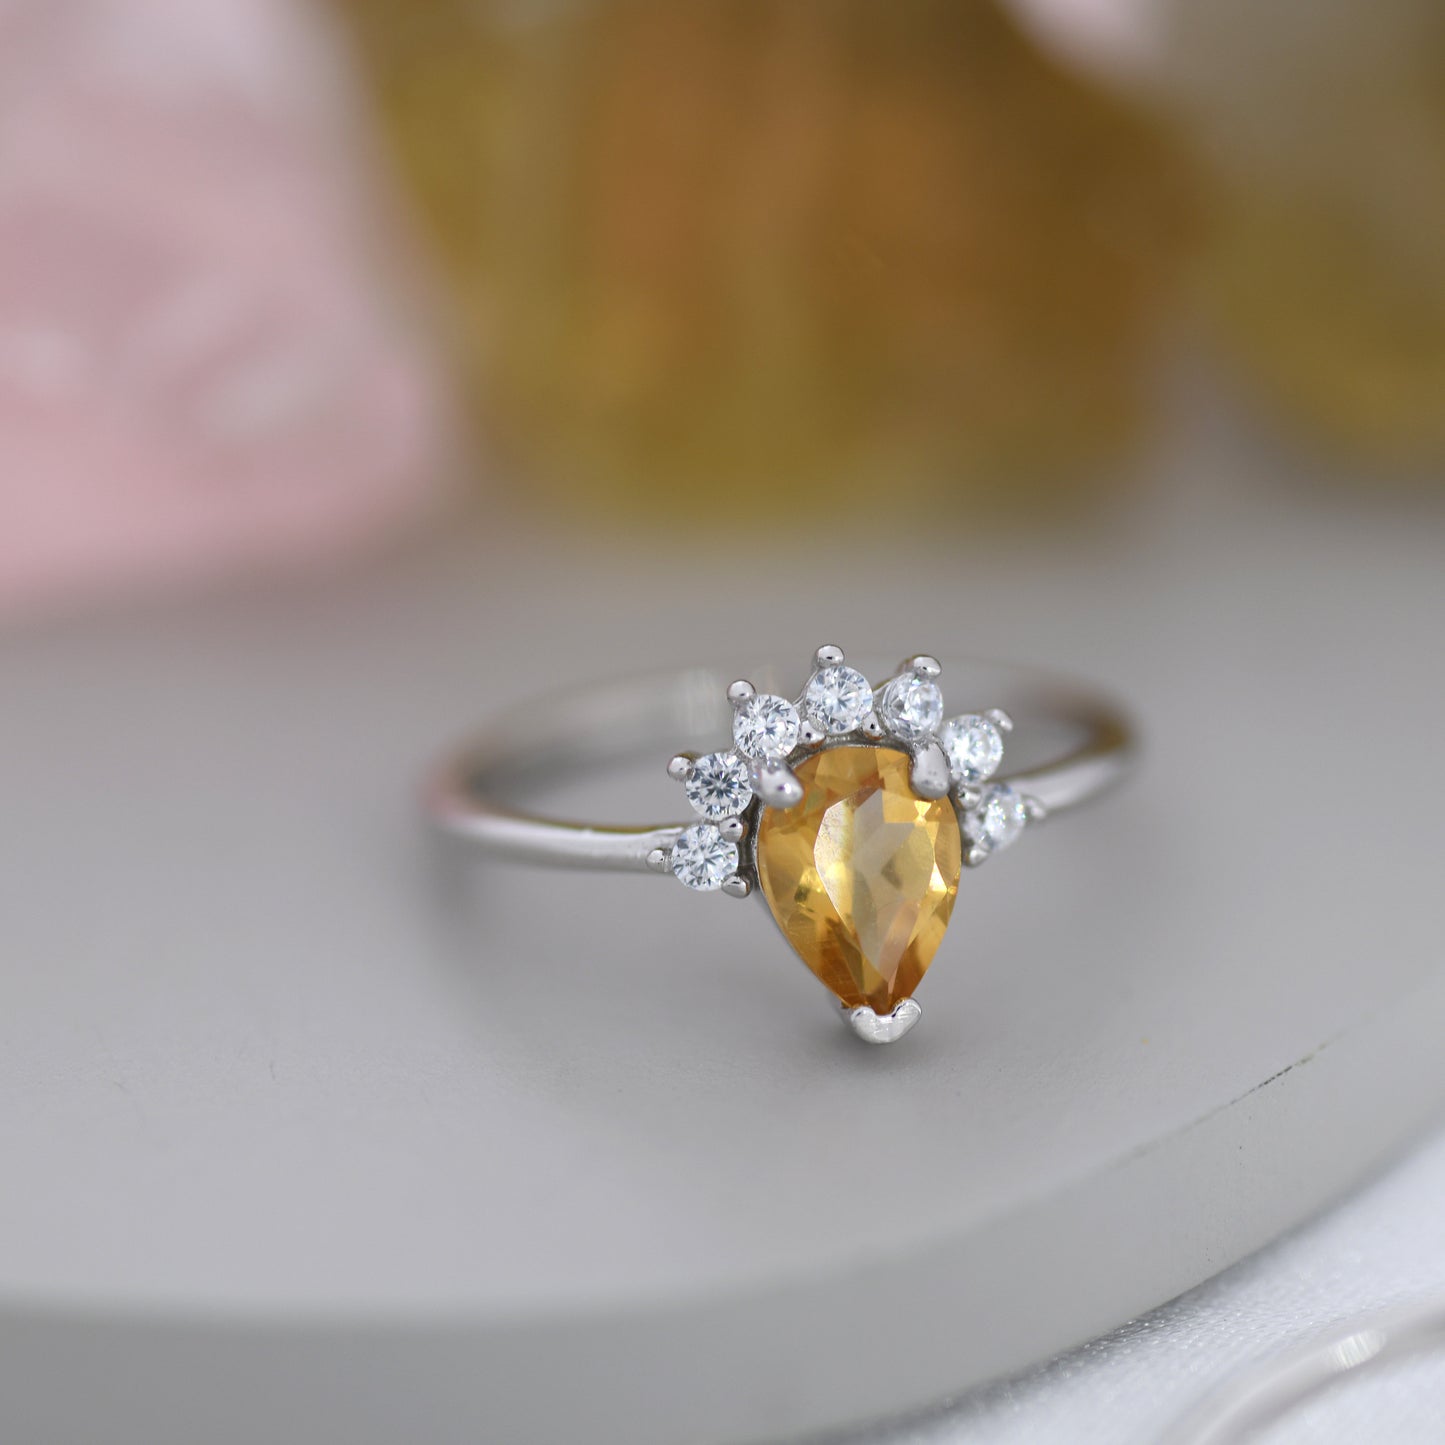 Genuine Pear Cut Citrine Crown Ring in Sterling Silver, Natural Yellow Citrine Crystal Ring, Vintage Inspired Design, US 5 - 8